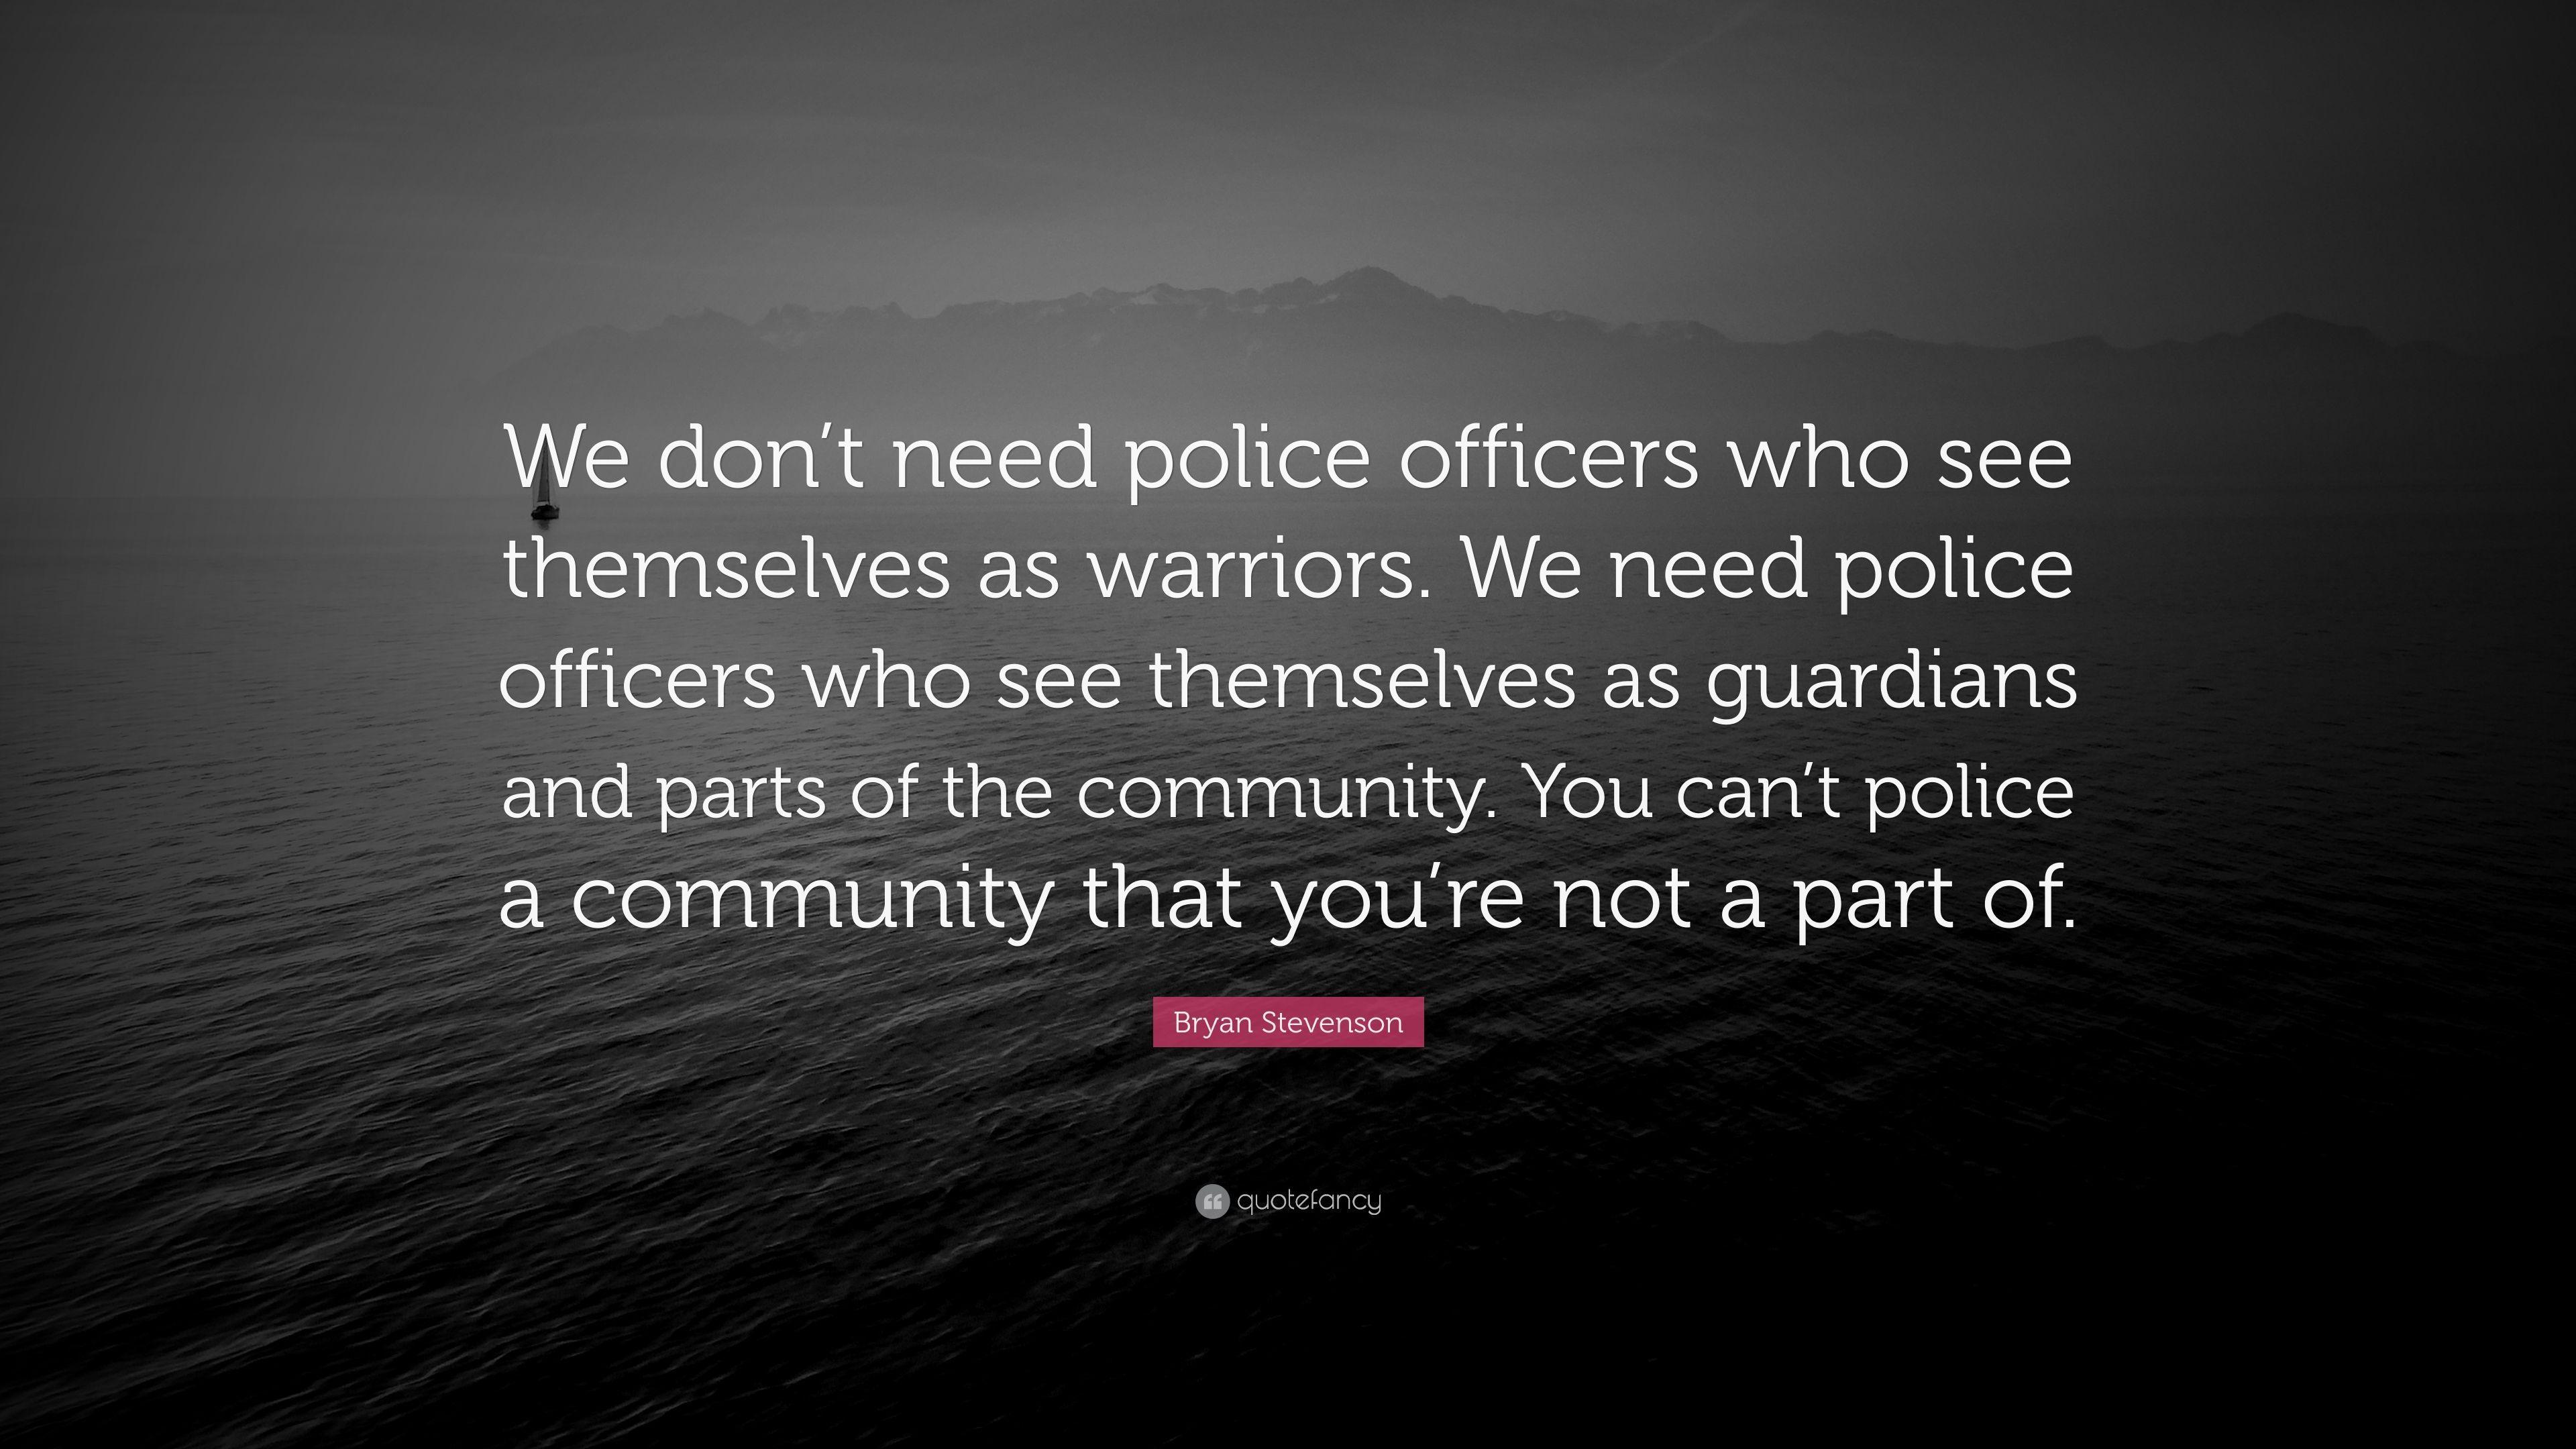 Bryan Stevenson Quote: “We don't need police officers who see